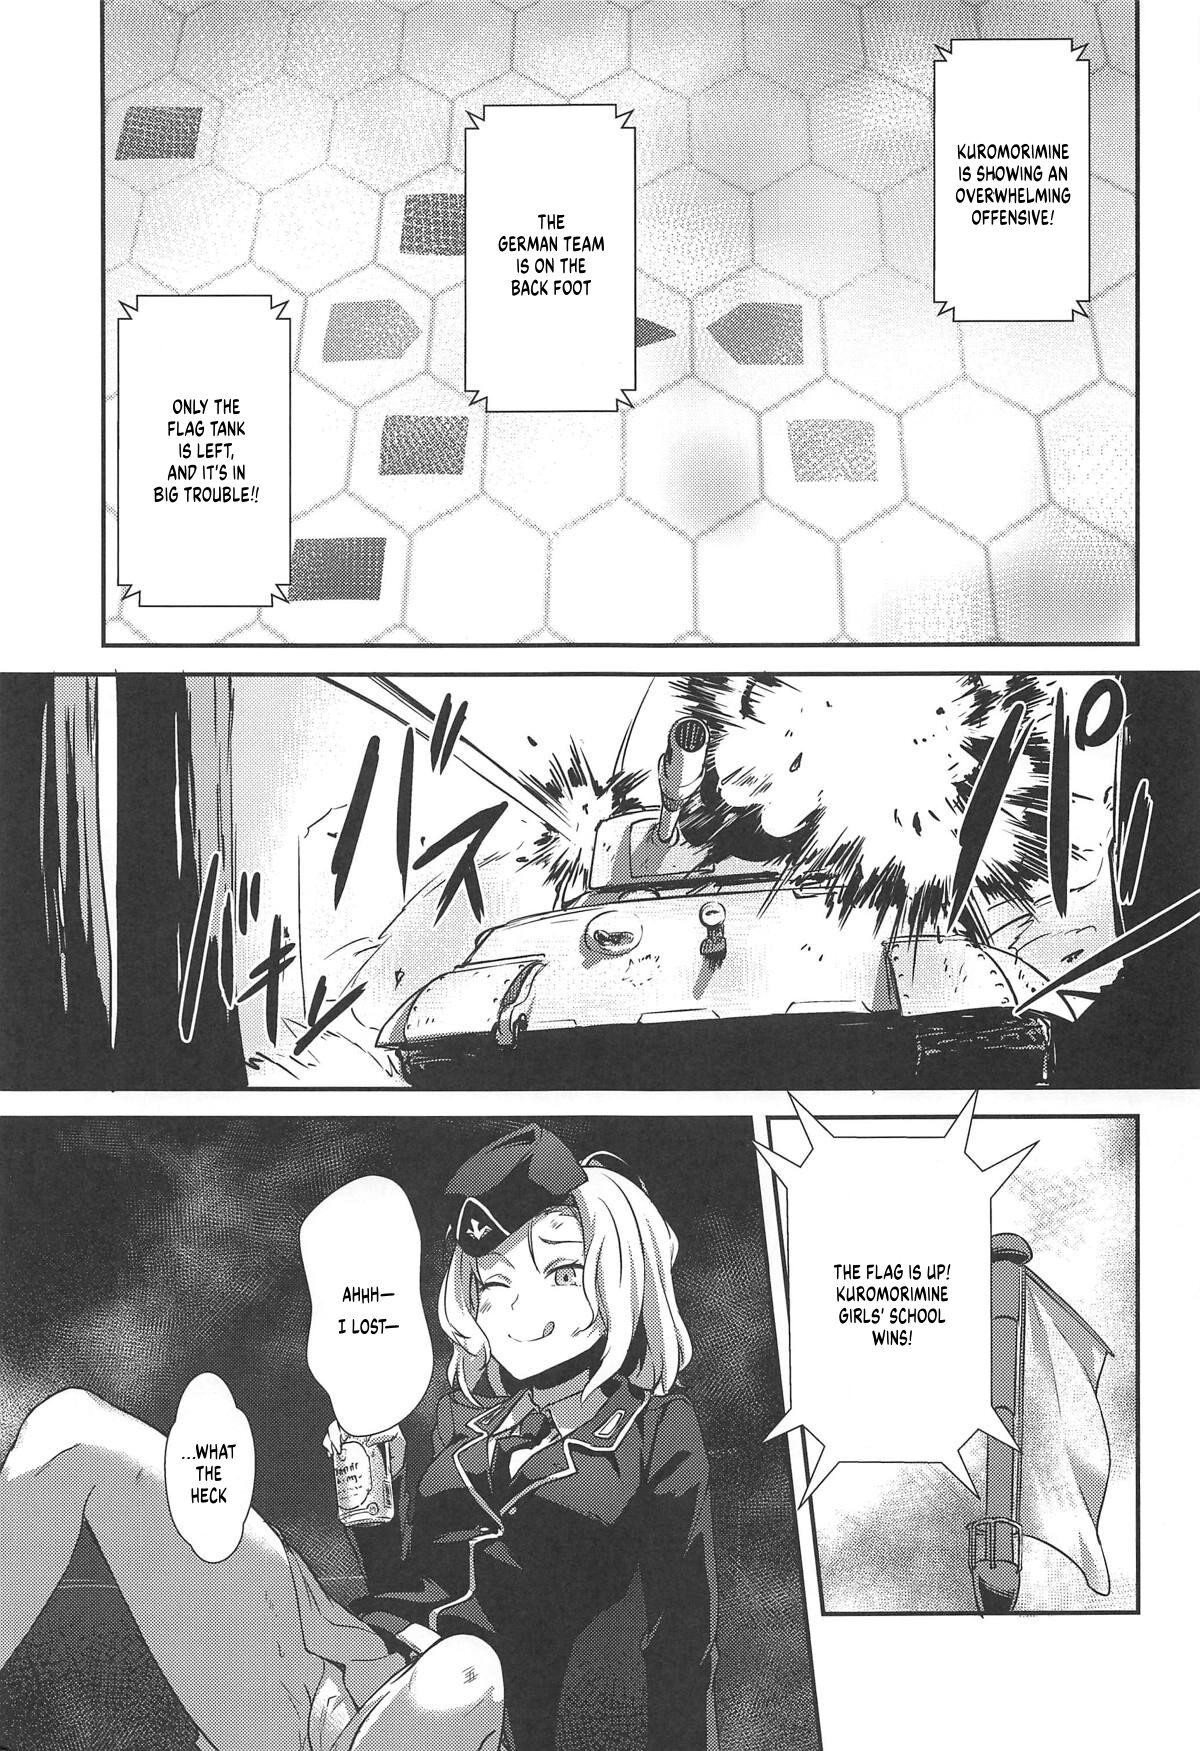 The Way How a Matriarch is Brought Up - Maho's Case, Bottom 19